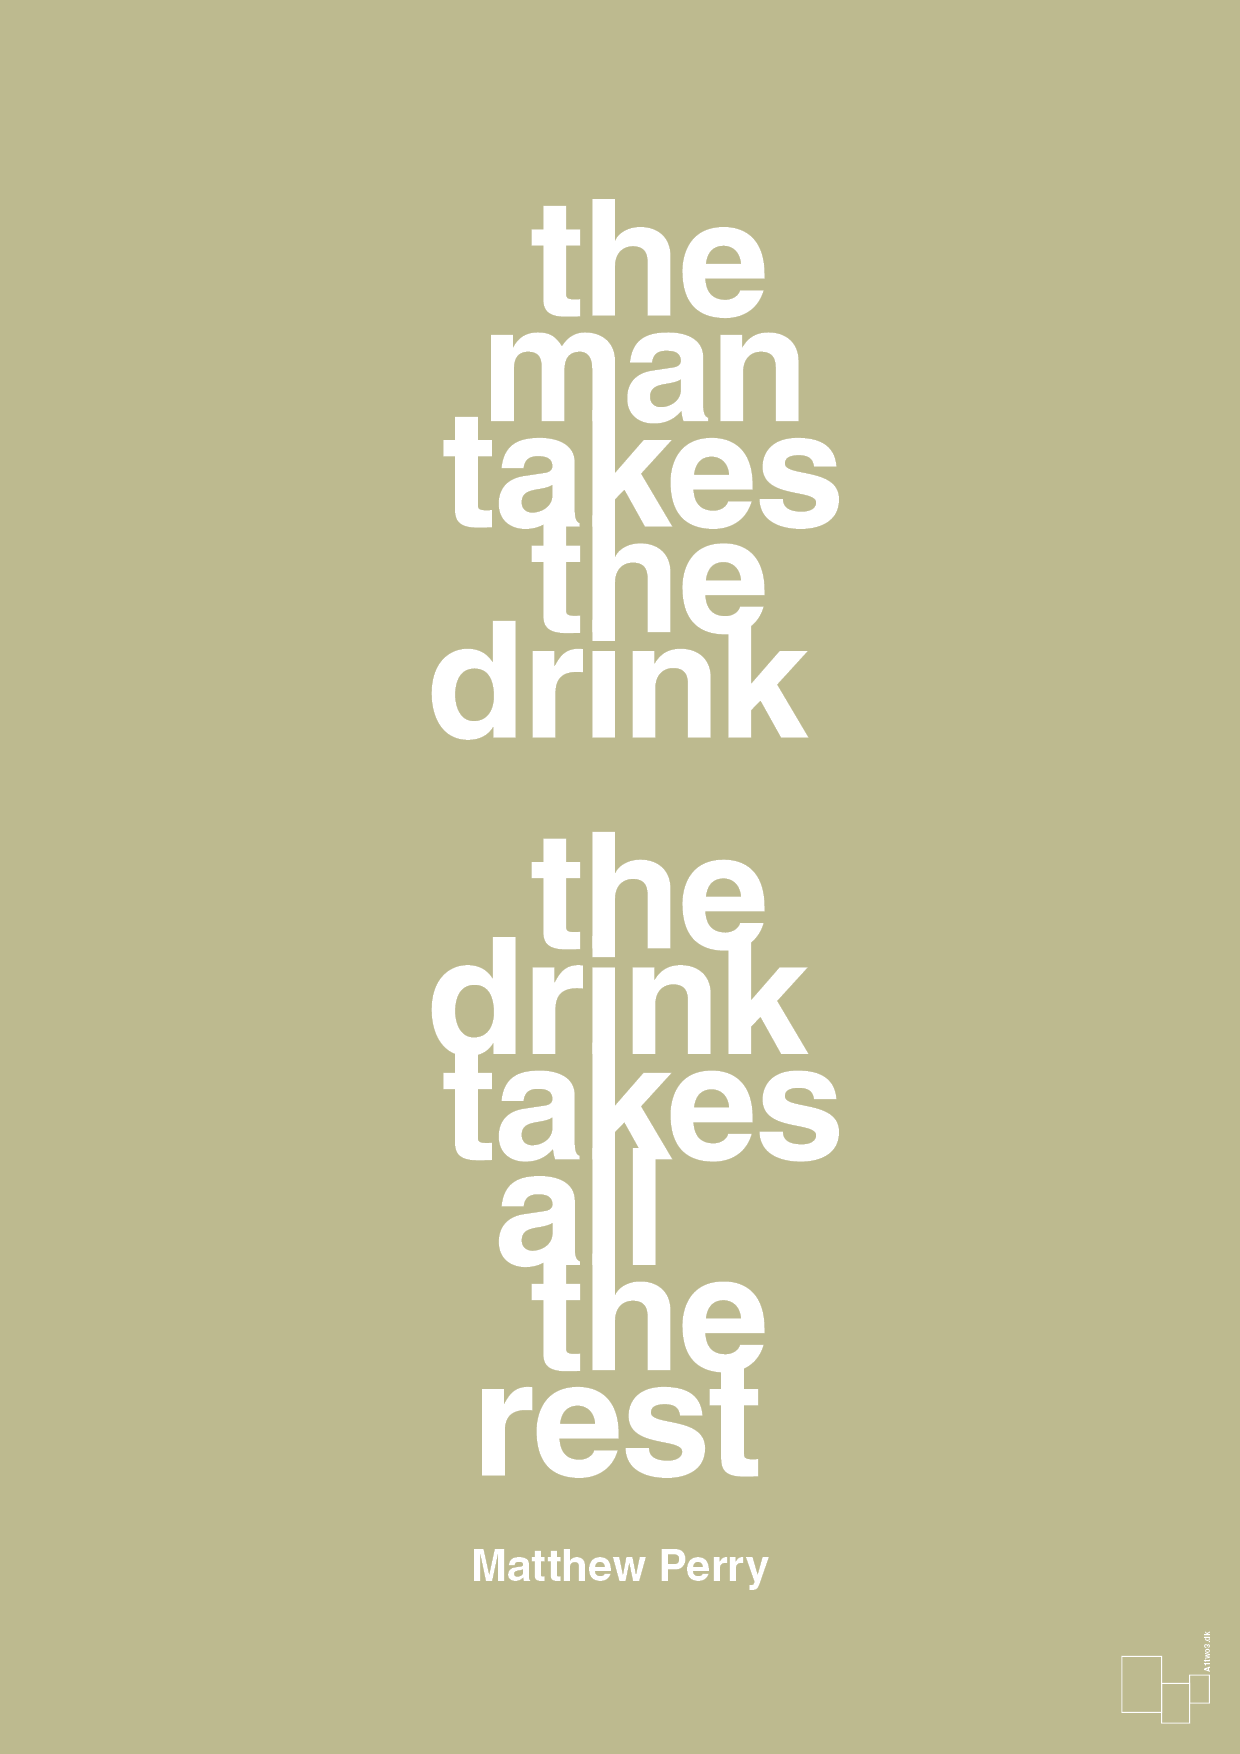 the man takes the drink the drink takes all the rest - Plakat med Citater i Back to Nature